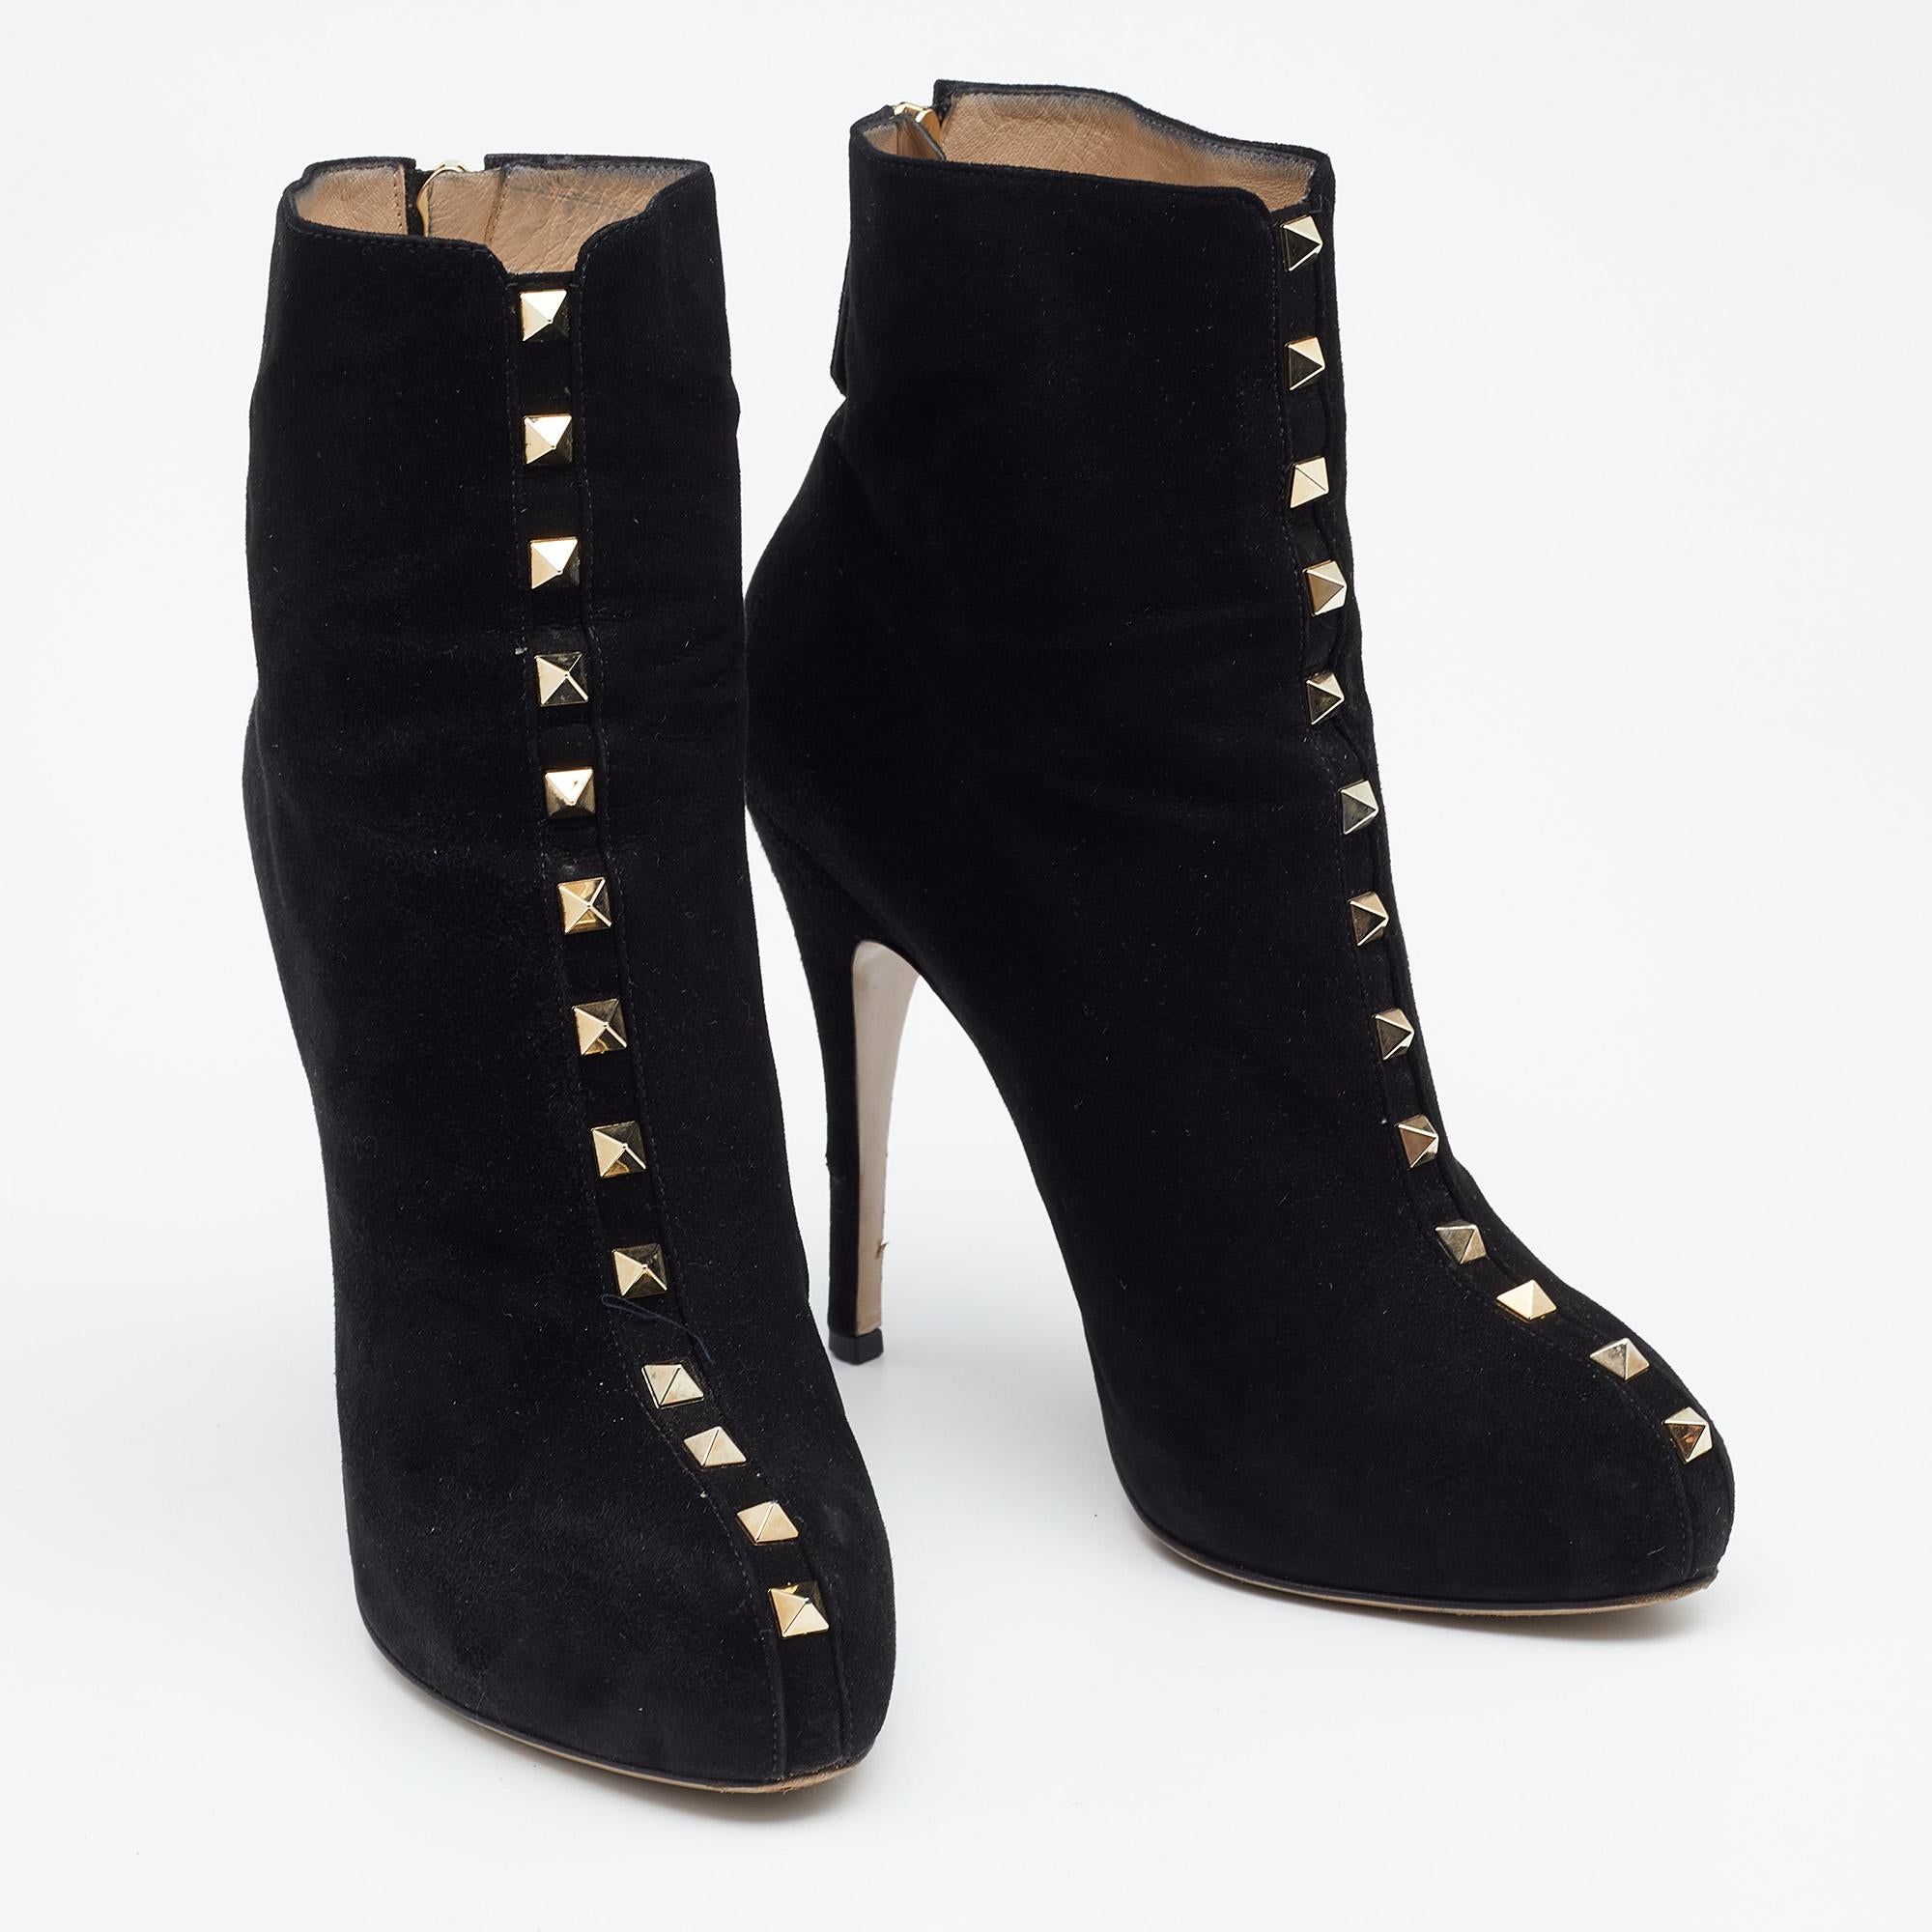 Valentino Black Suede Rockstud Ankle Length Boots Size 38 2